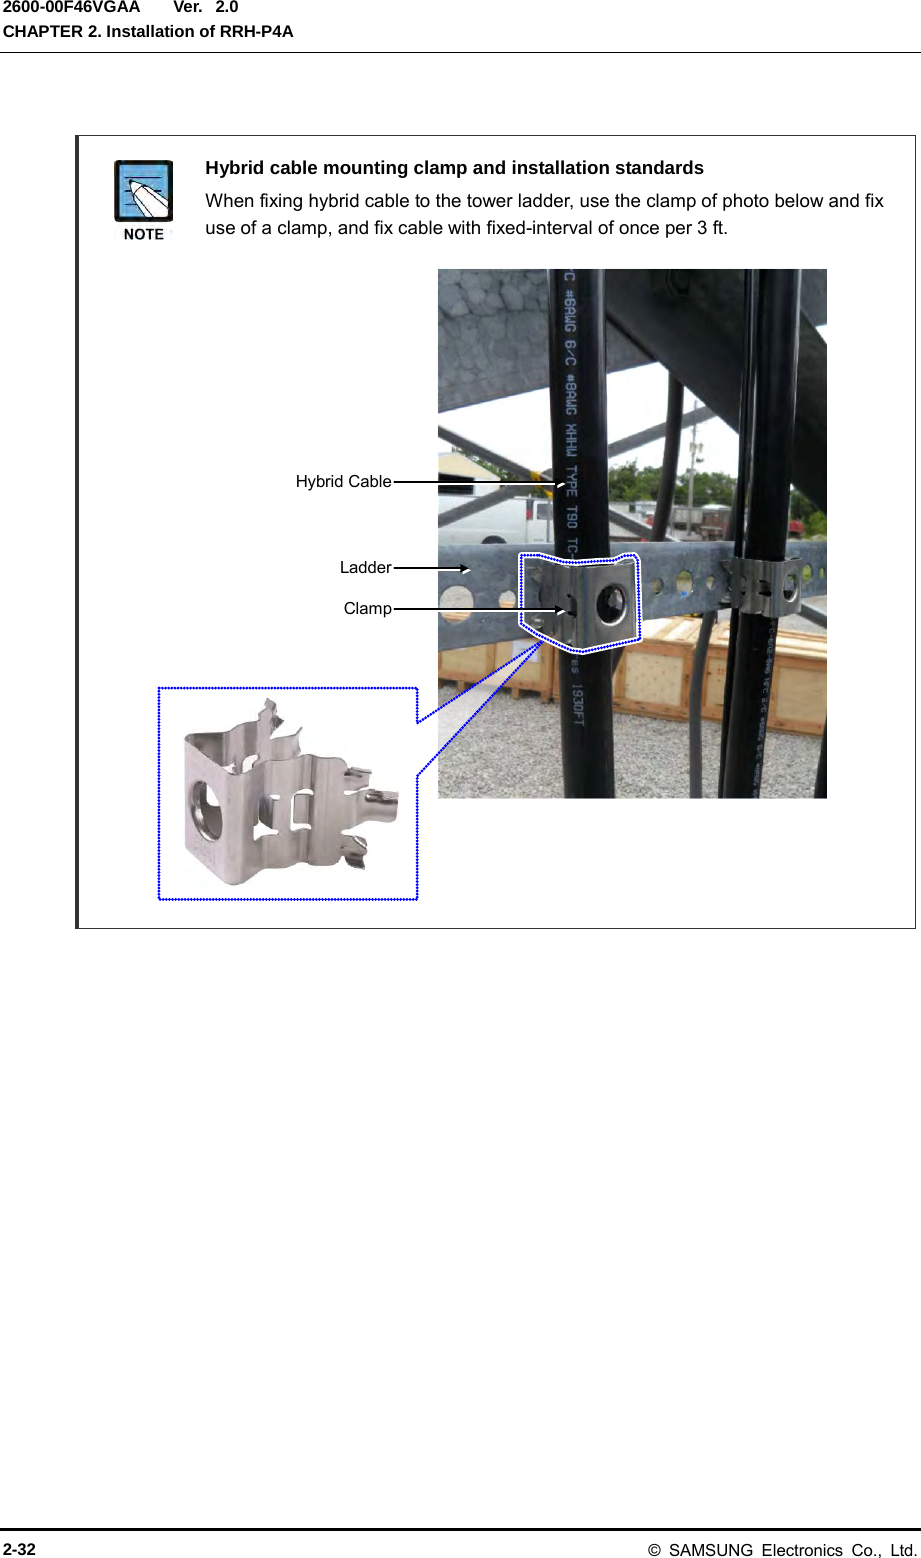  Ver.  CHAPTER 2. Installation of RRH-P4A 2600-00F46VGAA 2.0   Hybrid cable mounting clamp and installation standards  When fixing hybrid cable to the tower ladder, use the clamp of photo below and fix use of a clamp, and fix cable with fixed-interval of once per 3 ft.                        Clamp Ladder Hybrid Cable  2-32 © SAMSUNG Electronics Co., Ltd. 